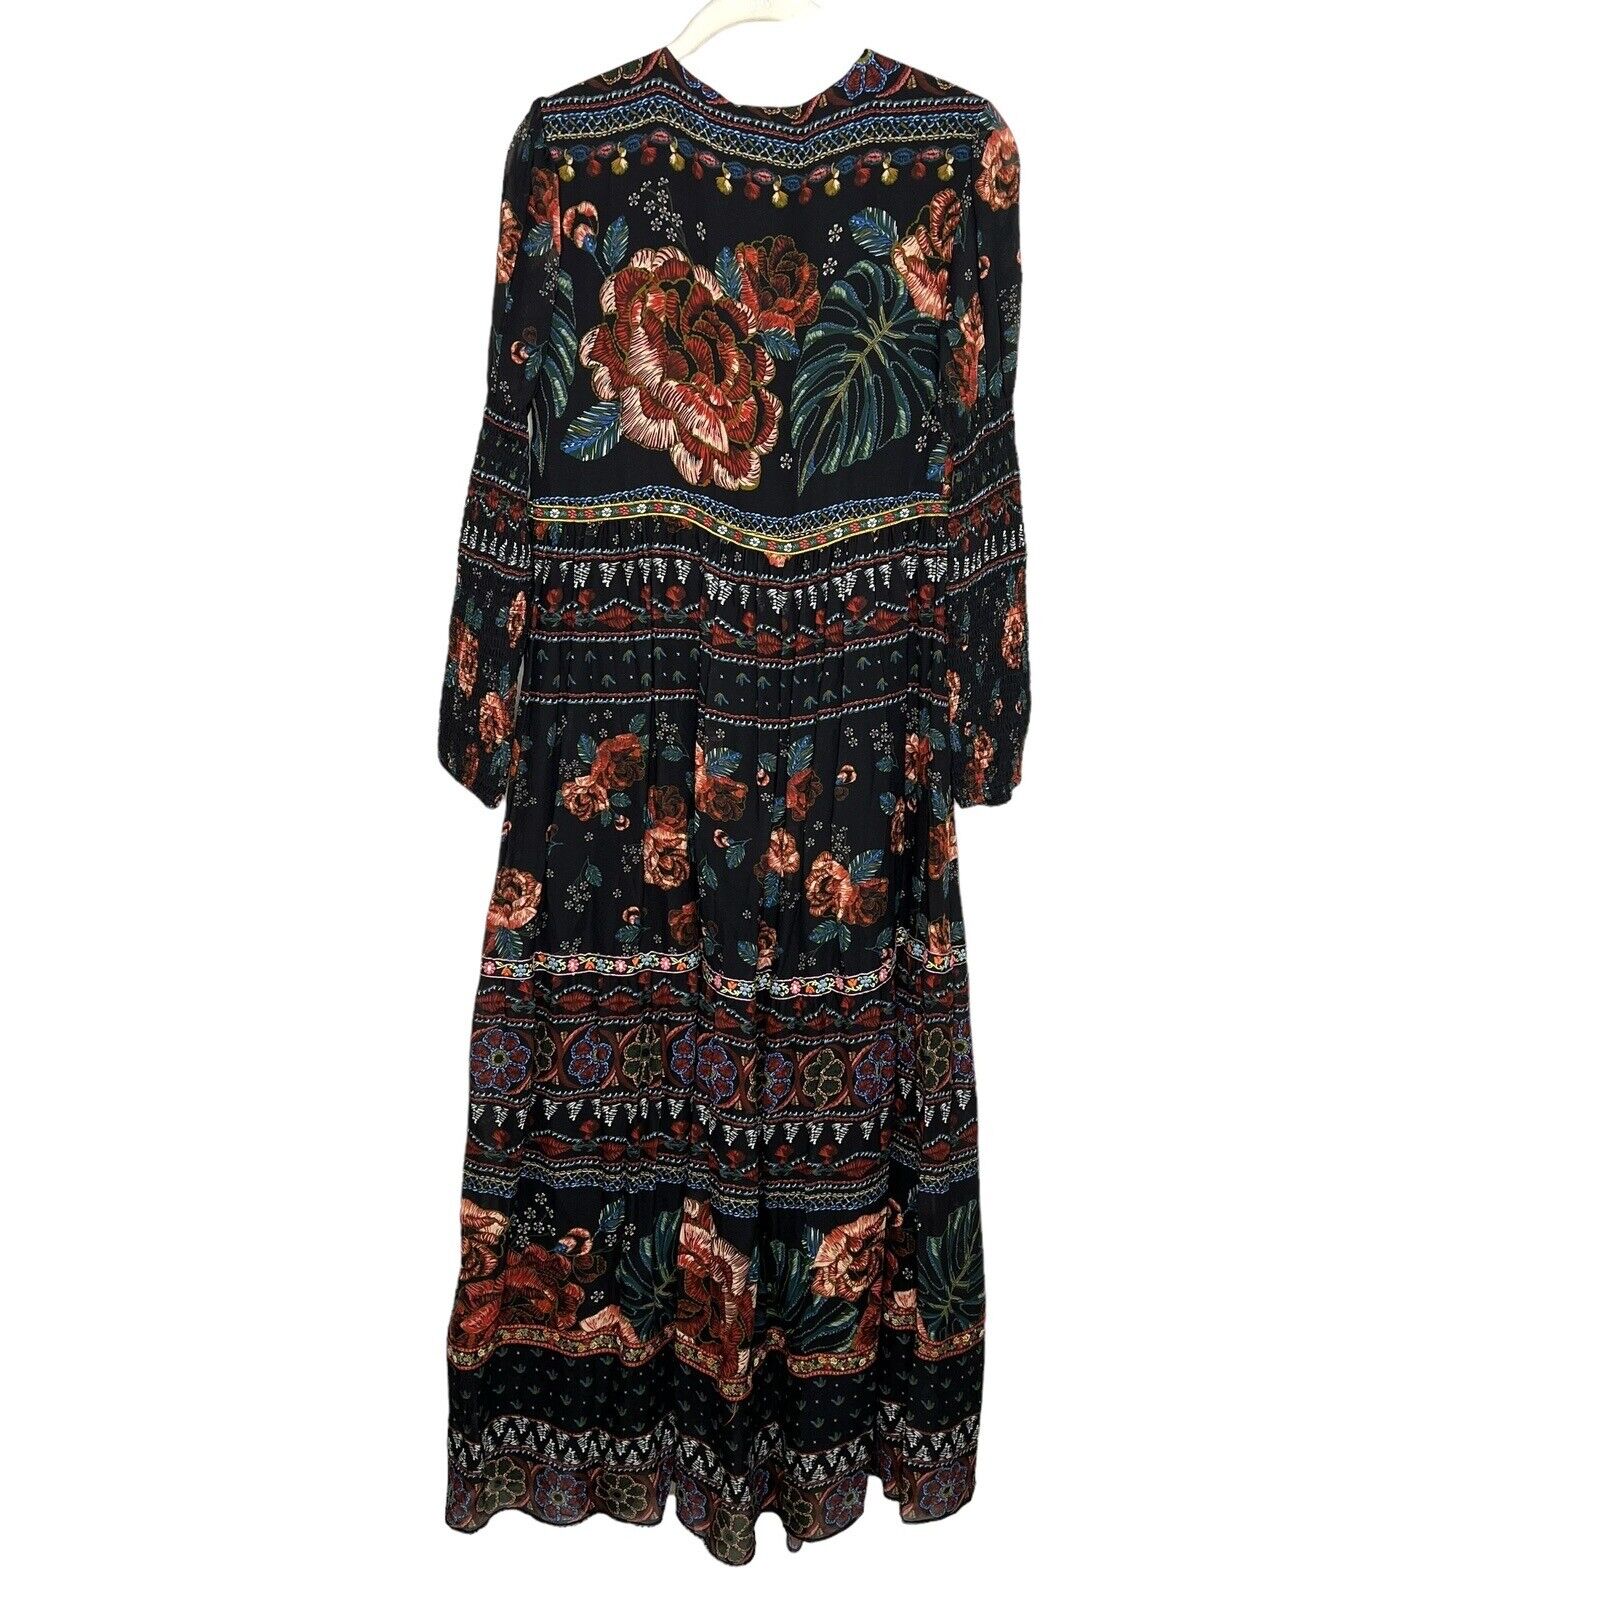 Farm Rio Embroidered Floral Maxi Dress Size XS NEW $295